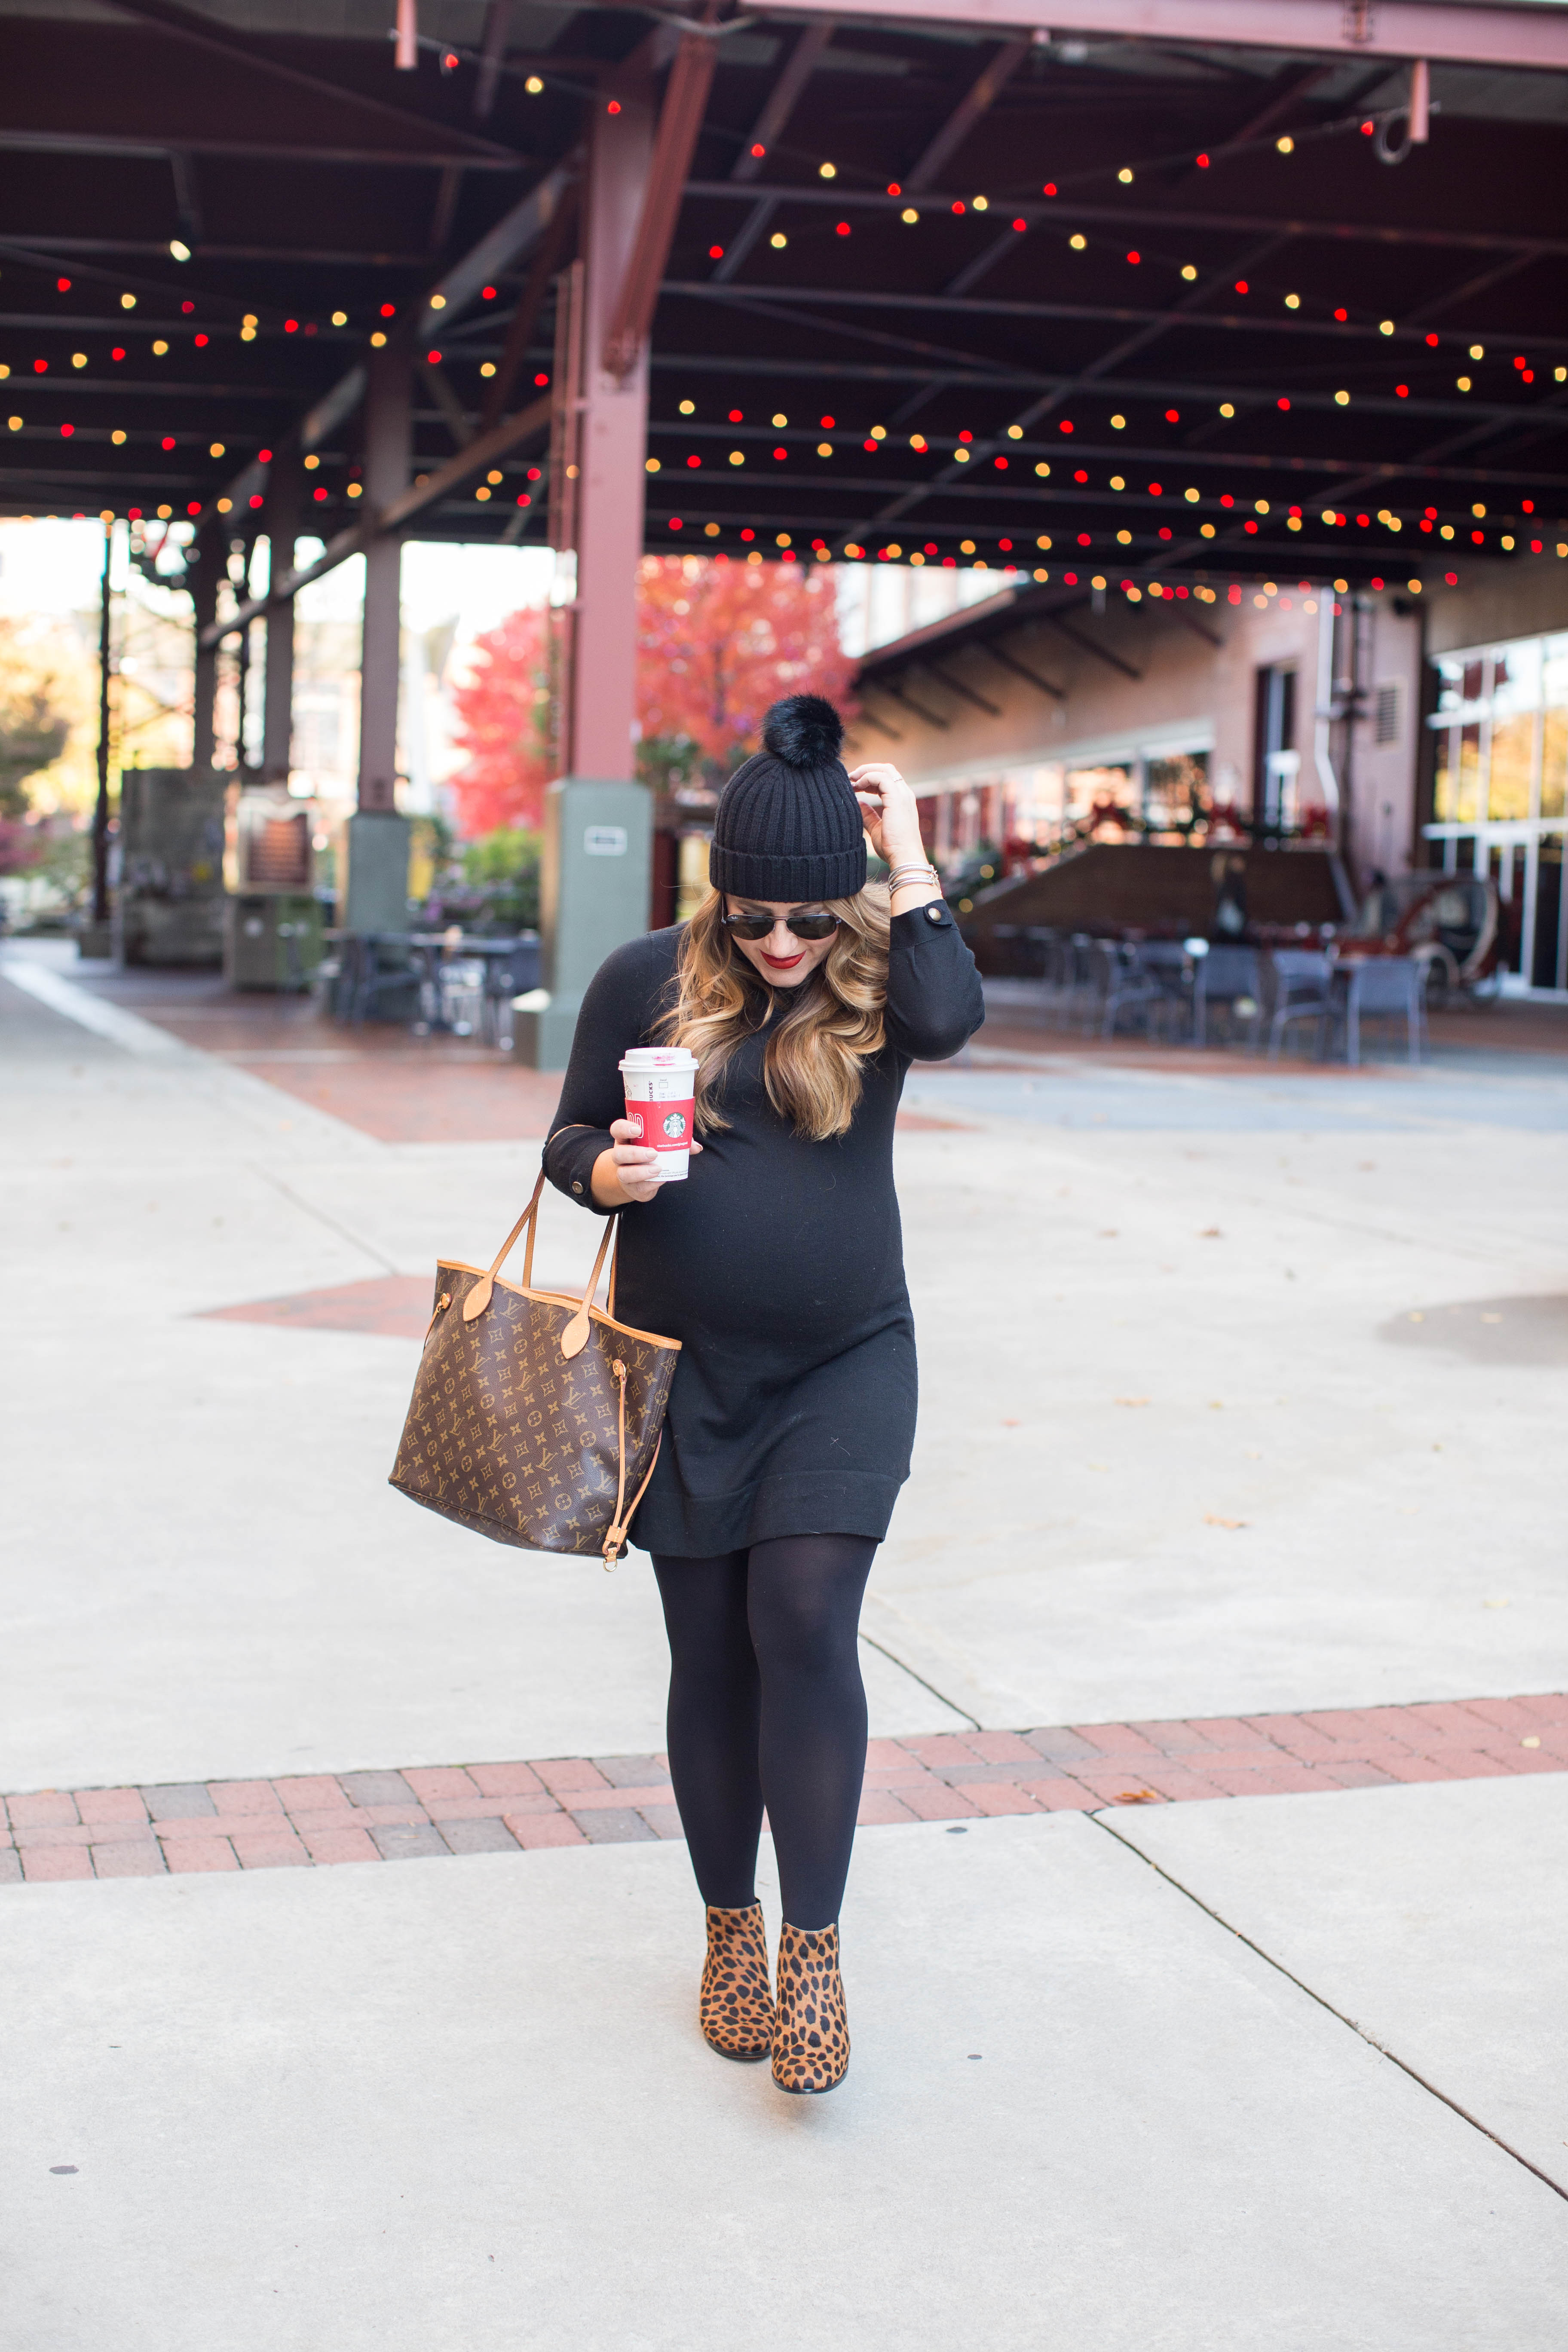 Little Black Turtleneck Dress by North Carolina fashion blogger Coffee Beans and Bobby Pins